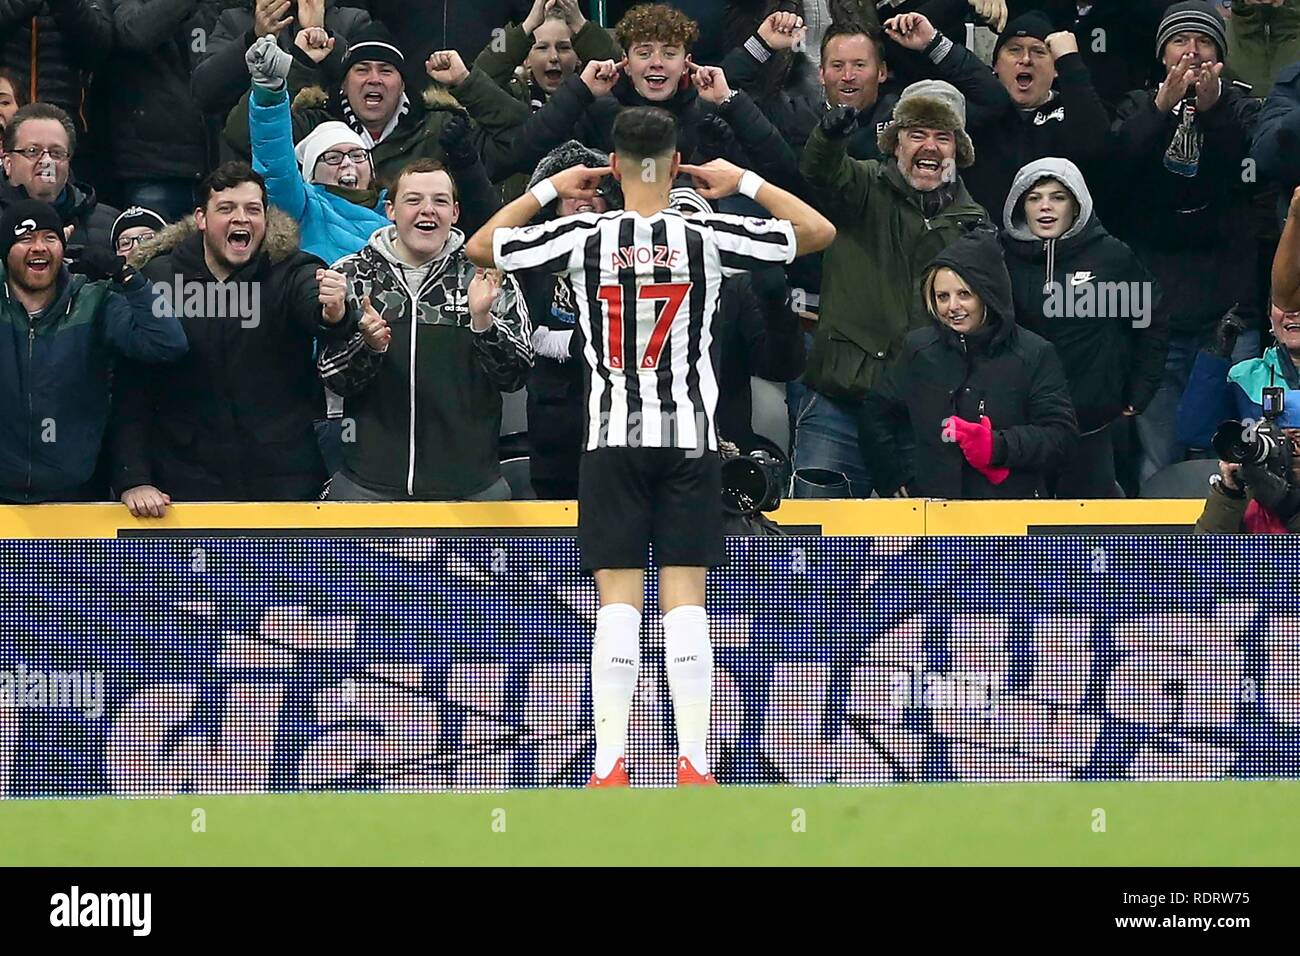 newcastle-uk-19th-january-2019-ayoze-perez-of-newcastle-united-celebrates-after-scoring-his-teams-3rd-goal-premier-league-match-newcastle-united-v-cardiff-city-at-st-james-park-in-newcastle-upon-tyne-on-saturday-19th-january-2019-this-image-may-only-be-used-for-editorial-purposes-editorial-use-only-license-required-for-commercial-use-no-use-in-betting-games-or-a-single-clubleagueplayer-publications-pic-by-chris-stadingandrew-orchard-sports-photographyalamy-live-news-credit-andrew-orchard-sports-photographyalamy-live-news-RDRW75.jpg